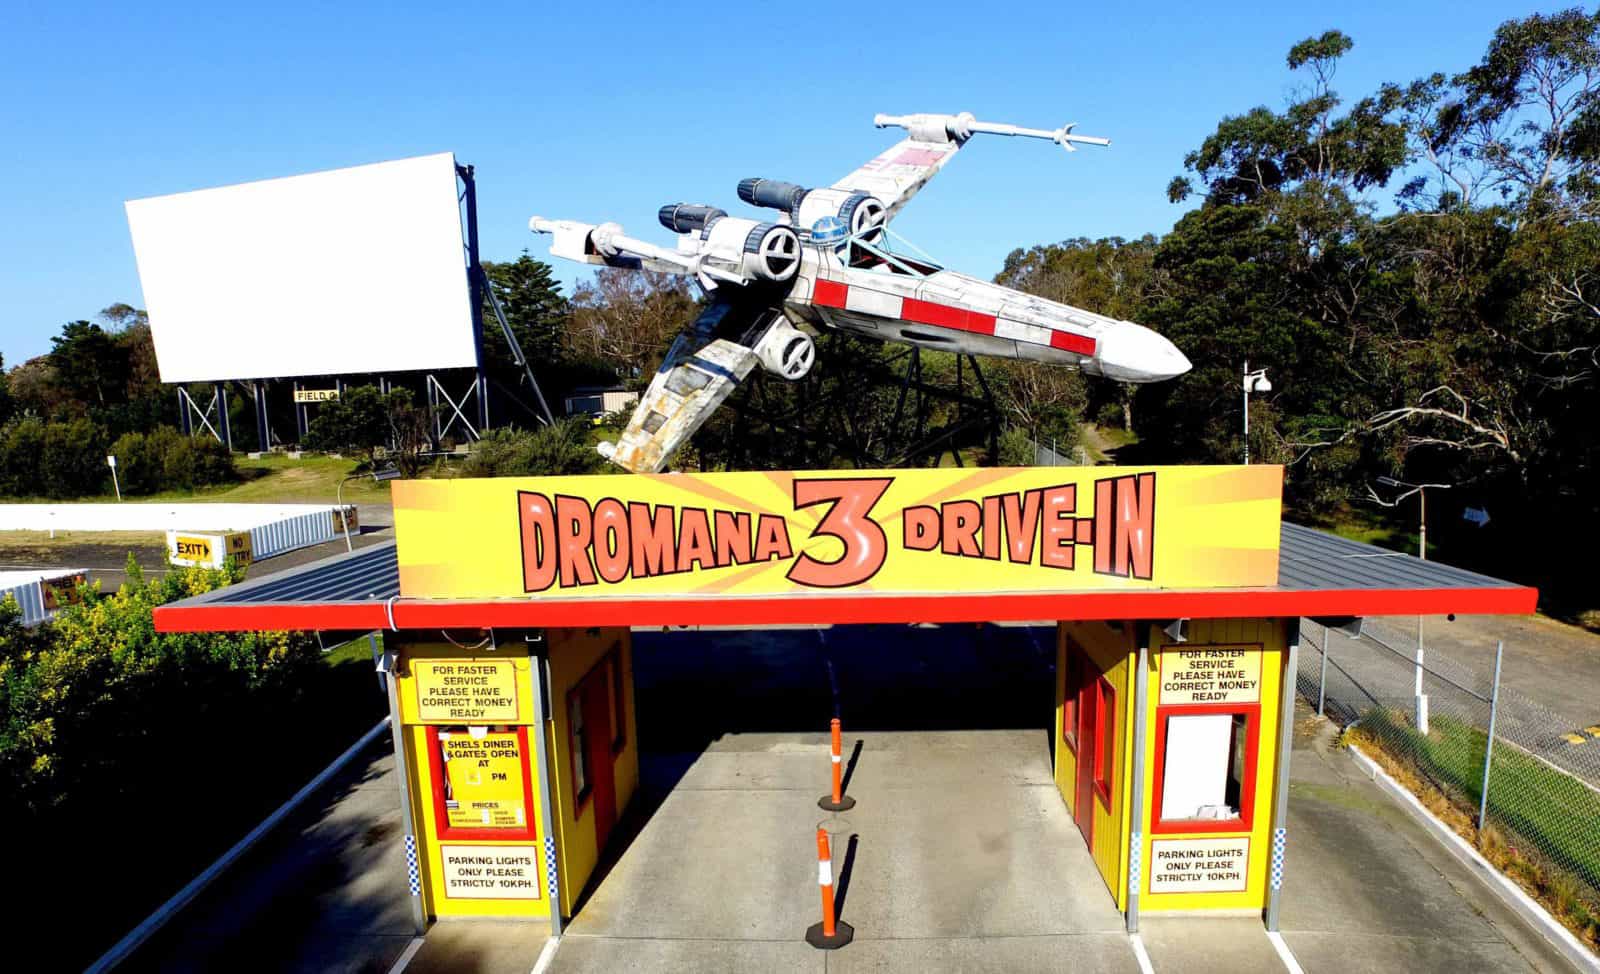 Dromana Drive In entrance and Star Wars X-Wing Fighter